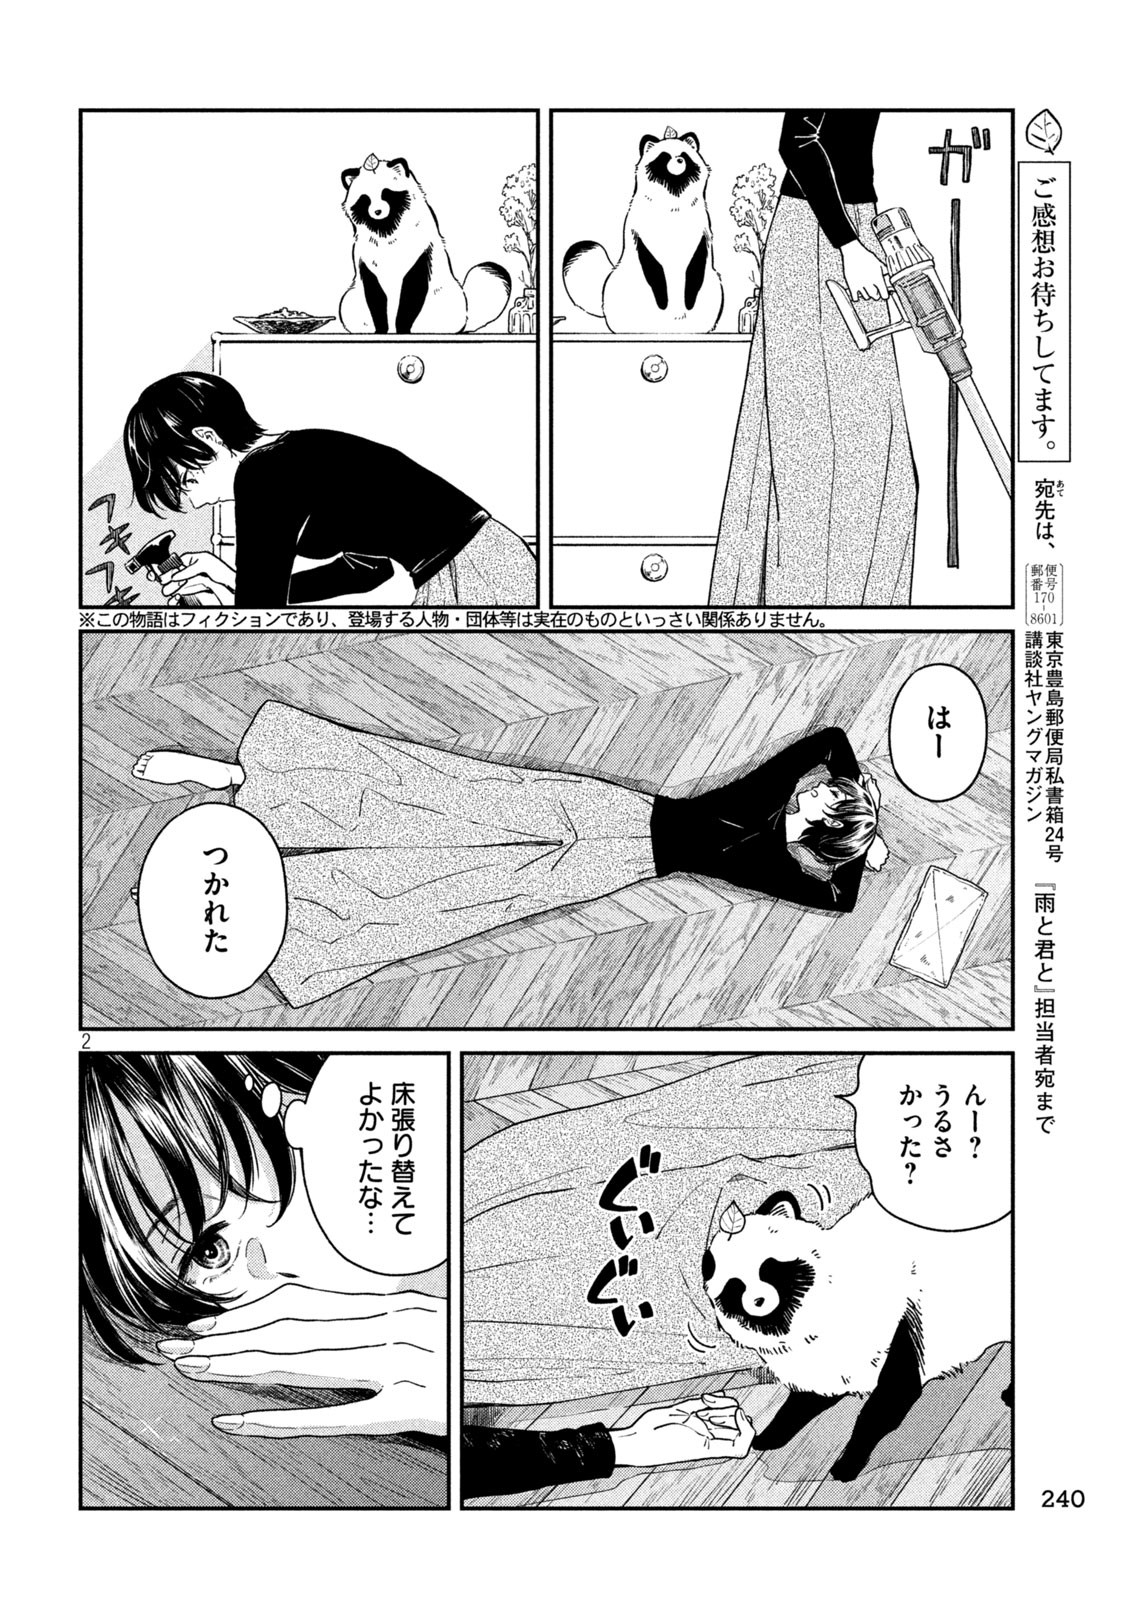 Ame to Kimi to - Chapter 103 - Page 2